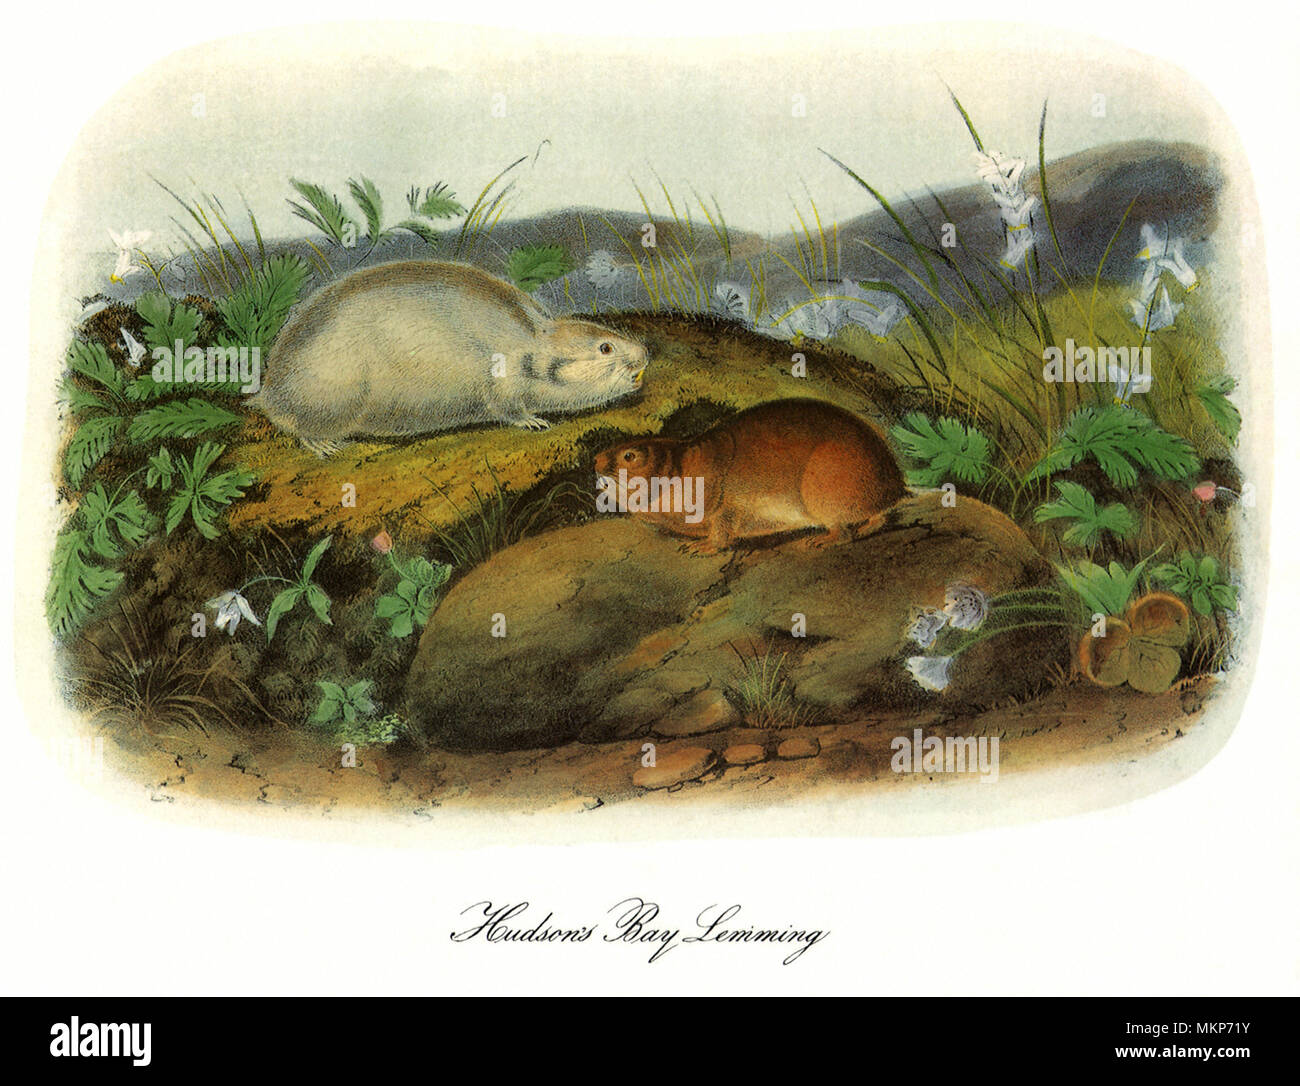 Lemming - Animal Facts for Kids - Characteristics & Pictures